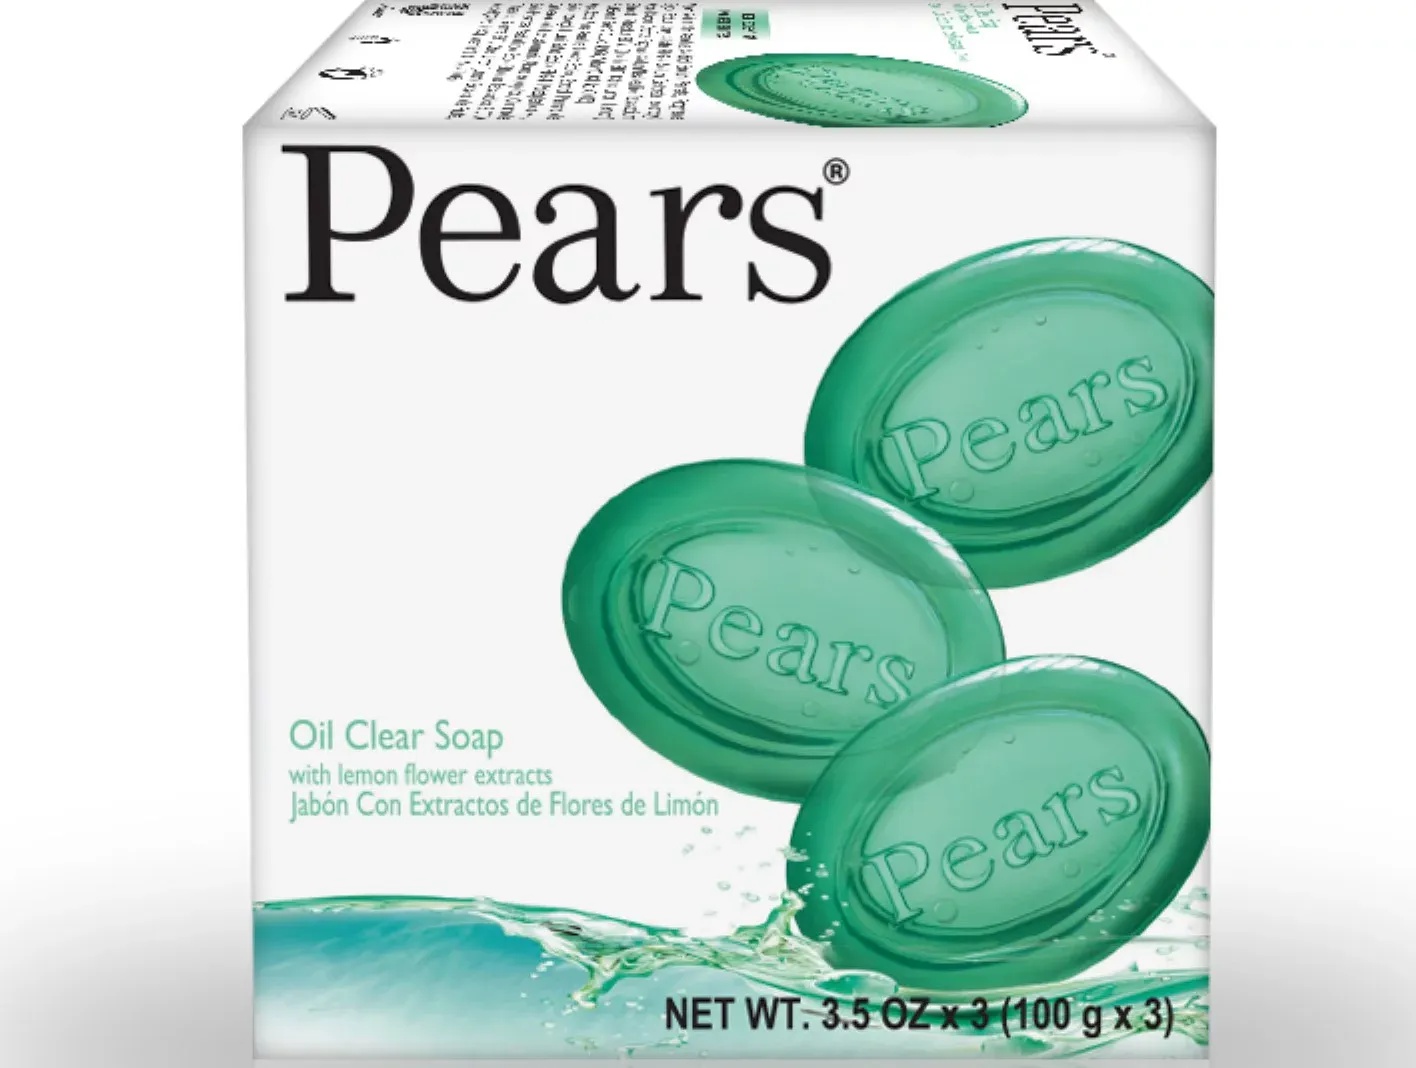 Pears Oil Clear Lemon Flower Extracts Soap